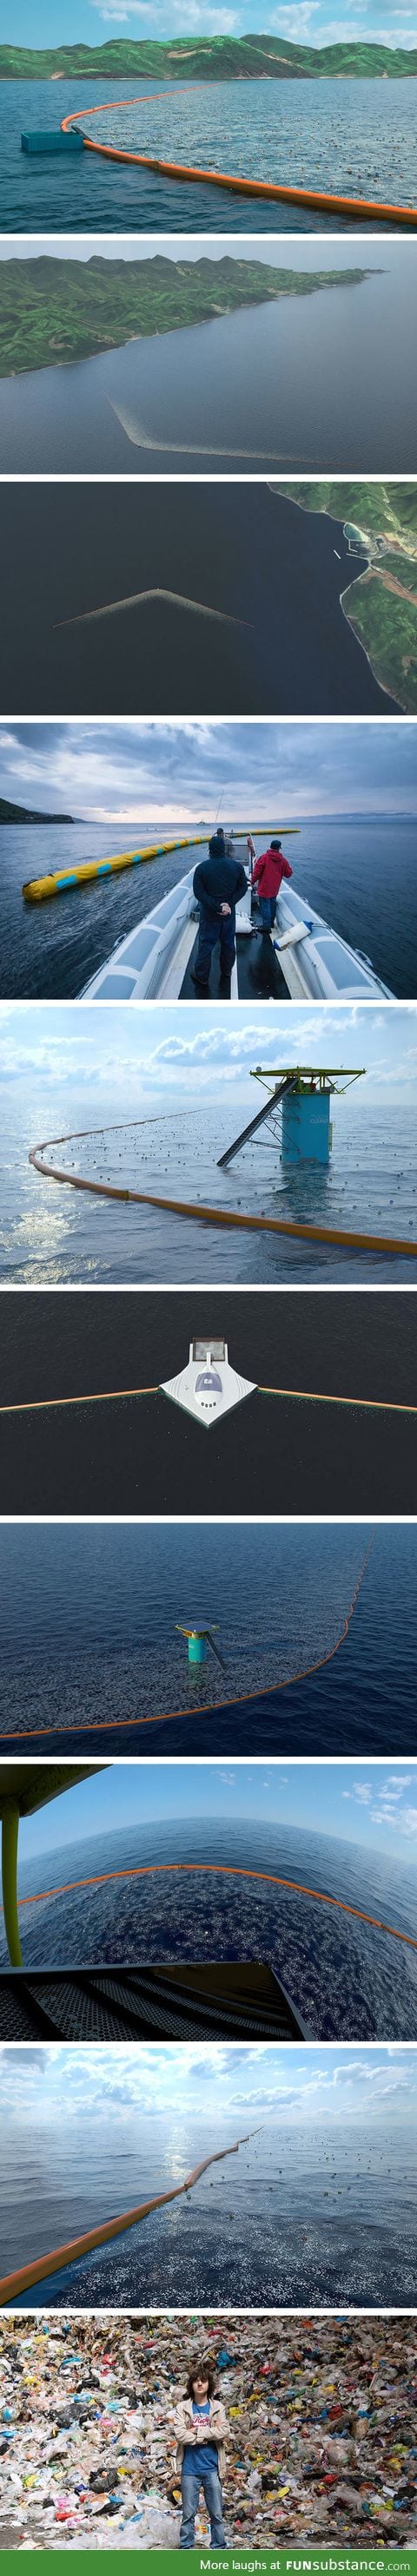 An inventor's idea for cleaner oceans